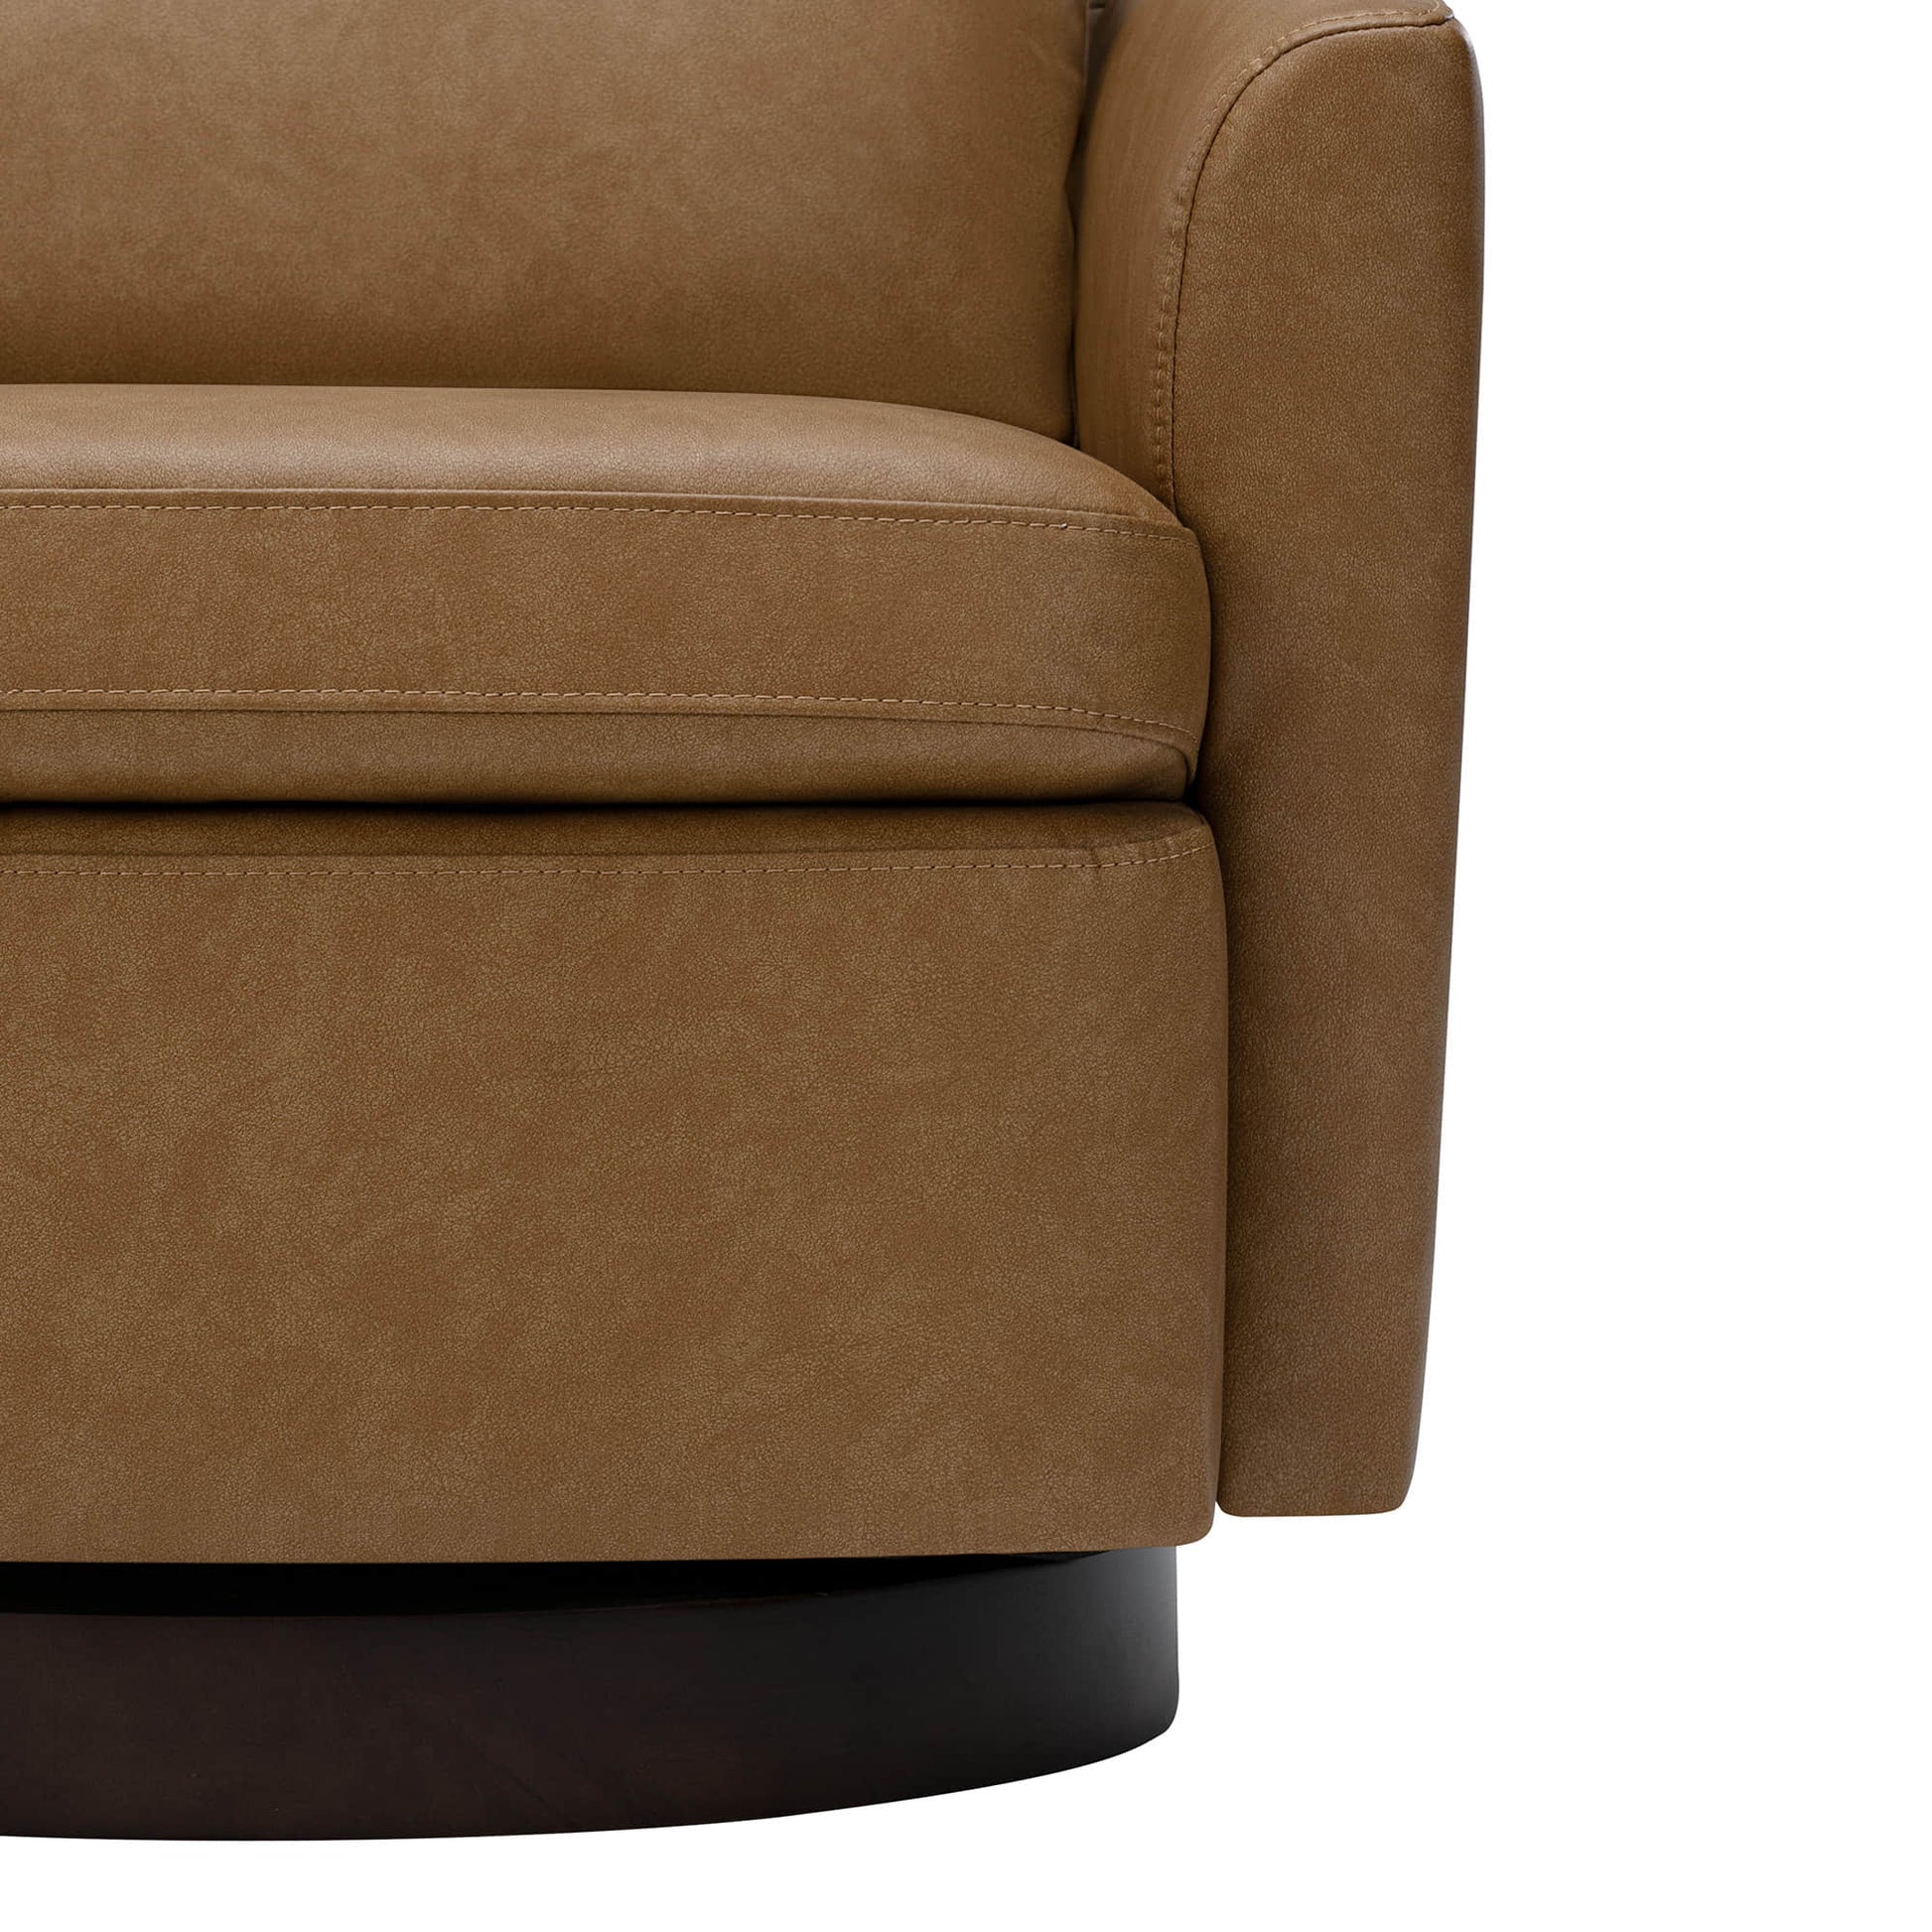 CHITA LIVING-Donella Modern Swivel Accent Chairs-Accent Chair-Faux Leather-Cognac-